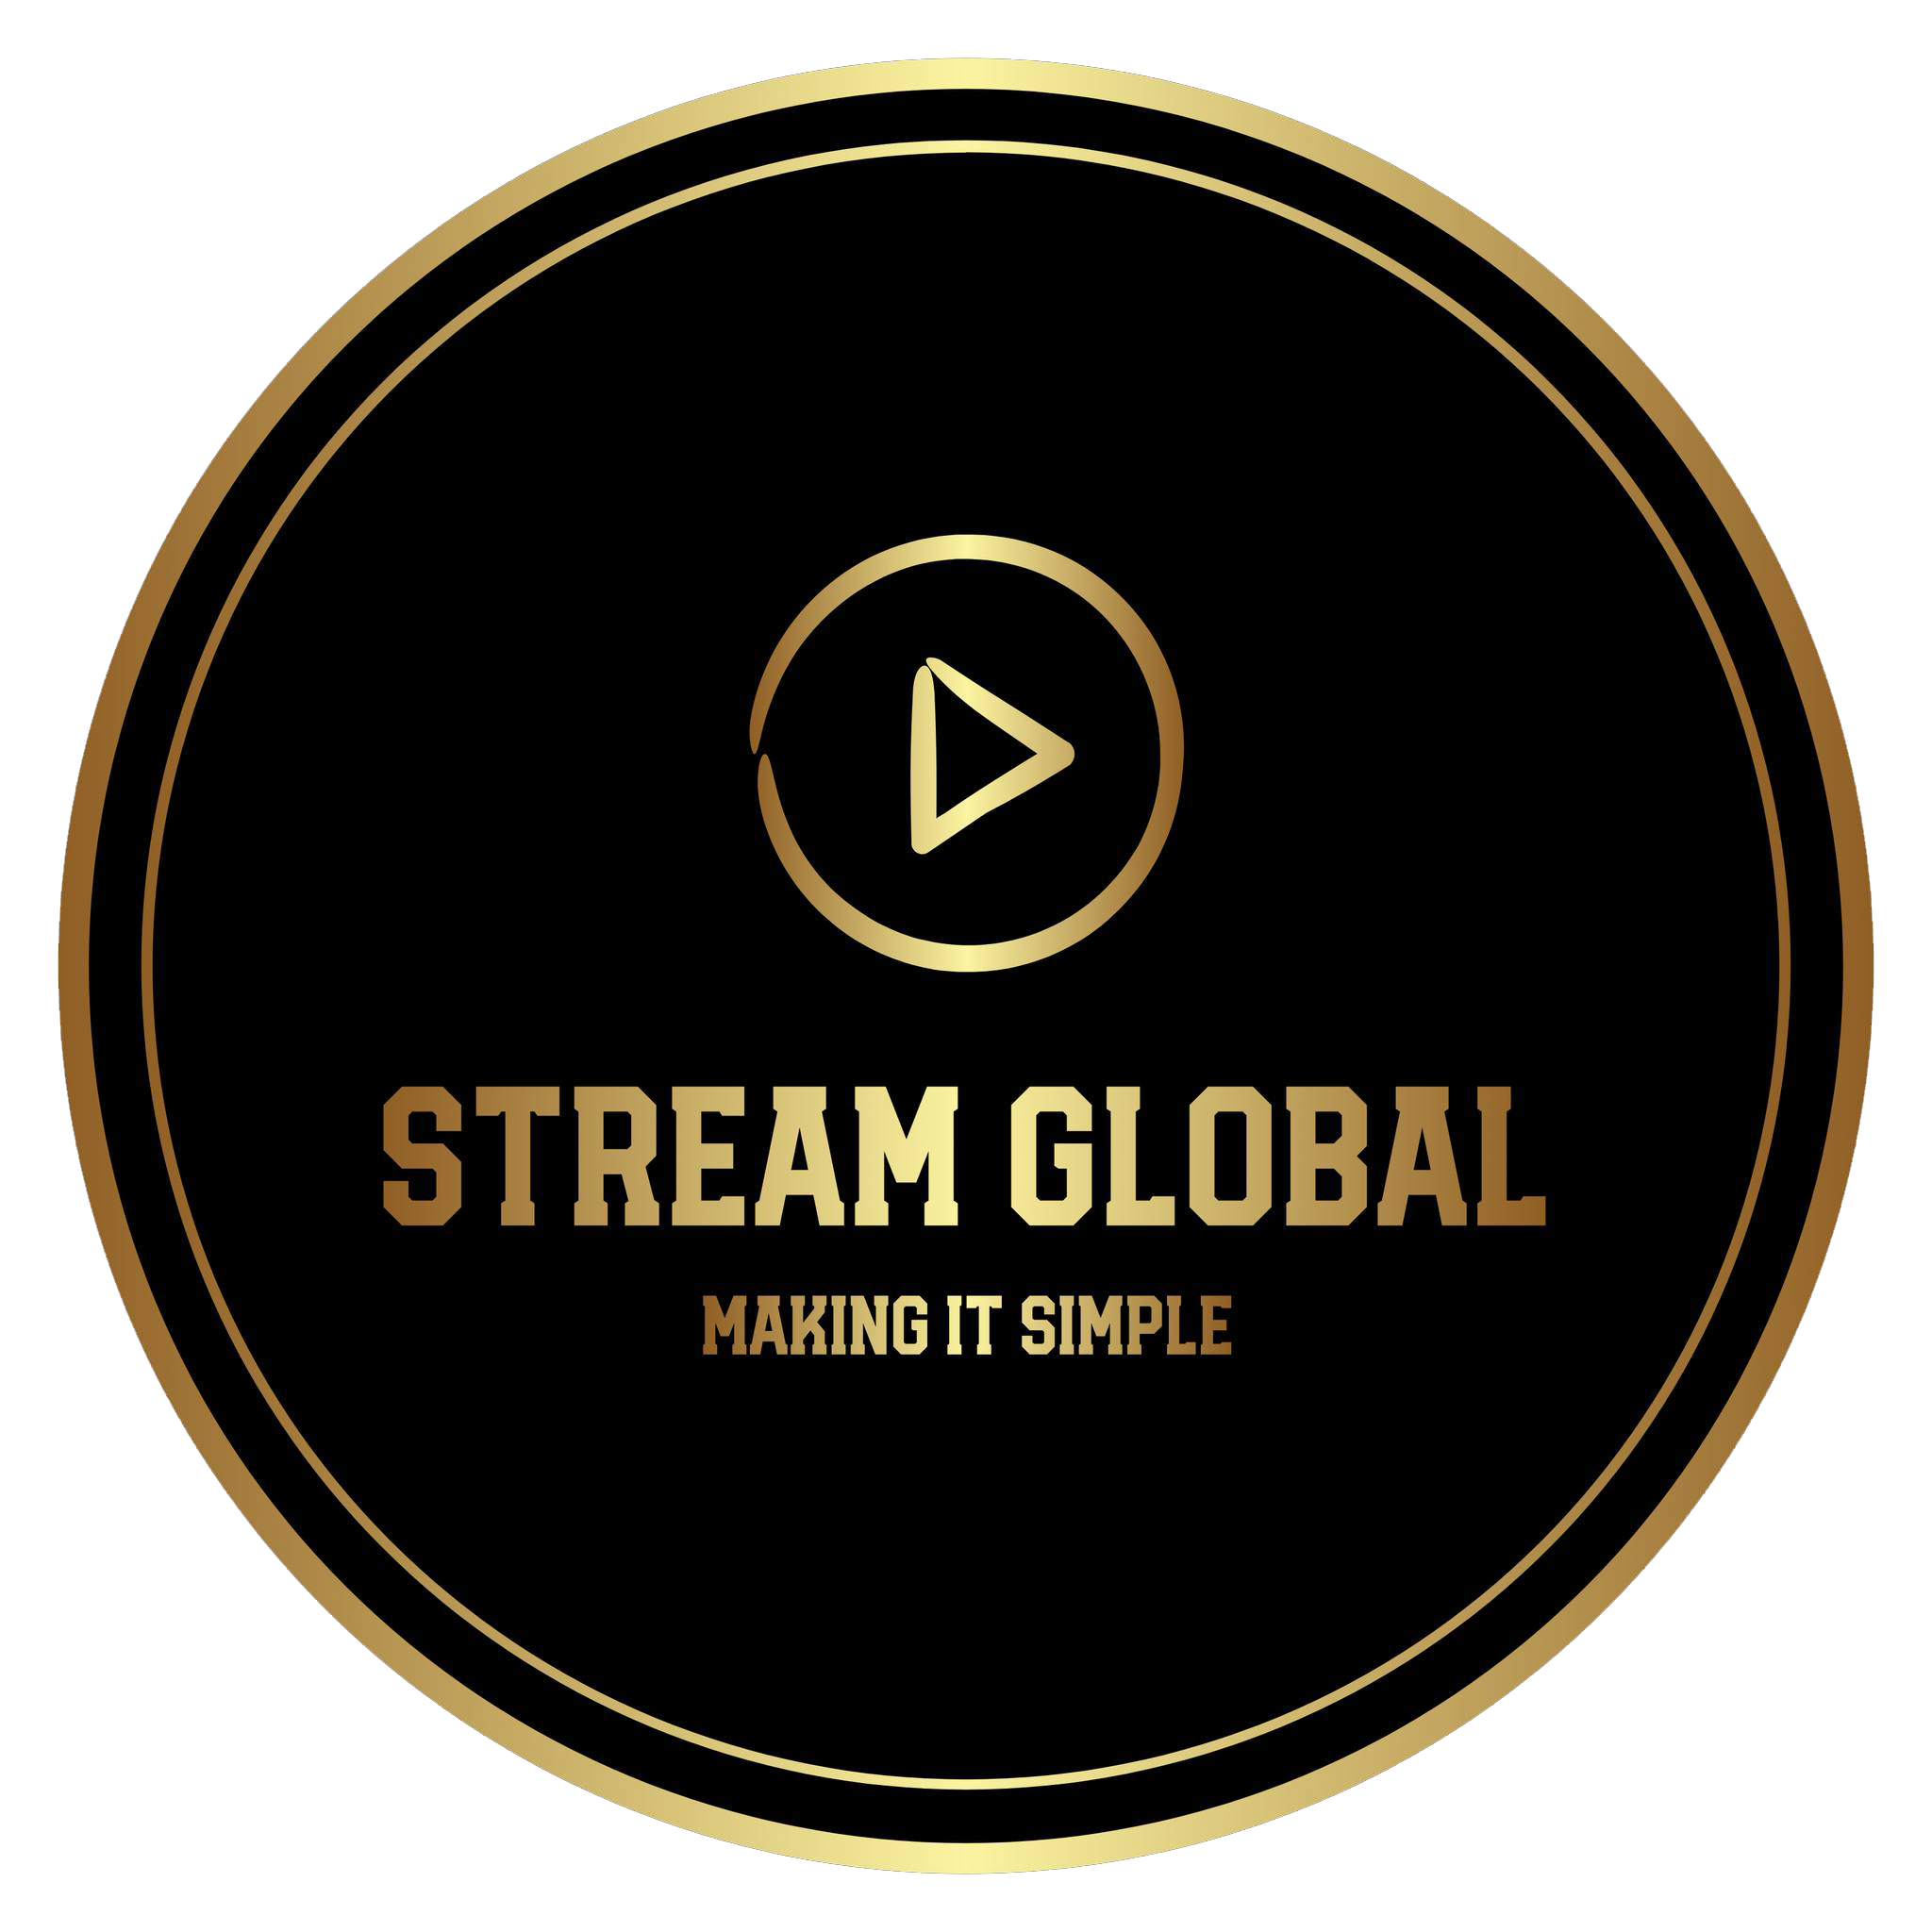 Stream Global Live Supporter